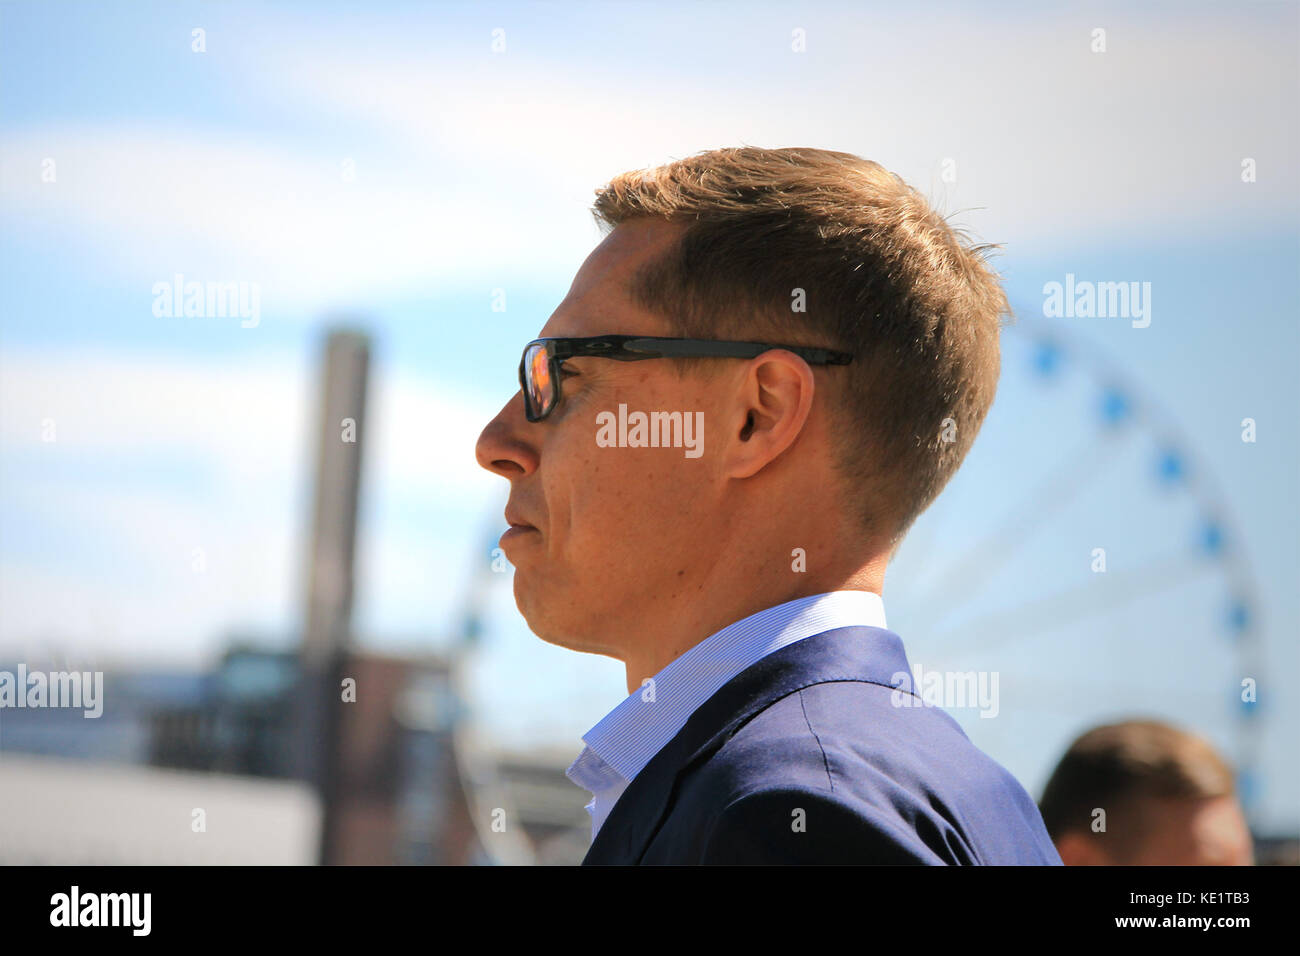 HELSINKI, FINLAND - JUNE 15, 2016: Finnish politician, Former Member of EU and Former Prime Minister of Finland Alexander Stubb in close up profile. S Stock Photo